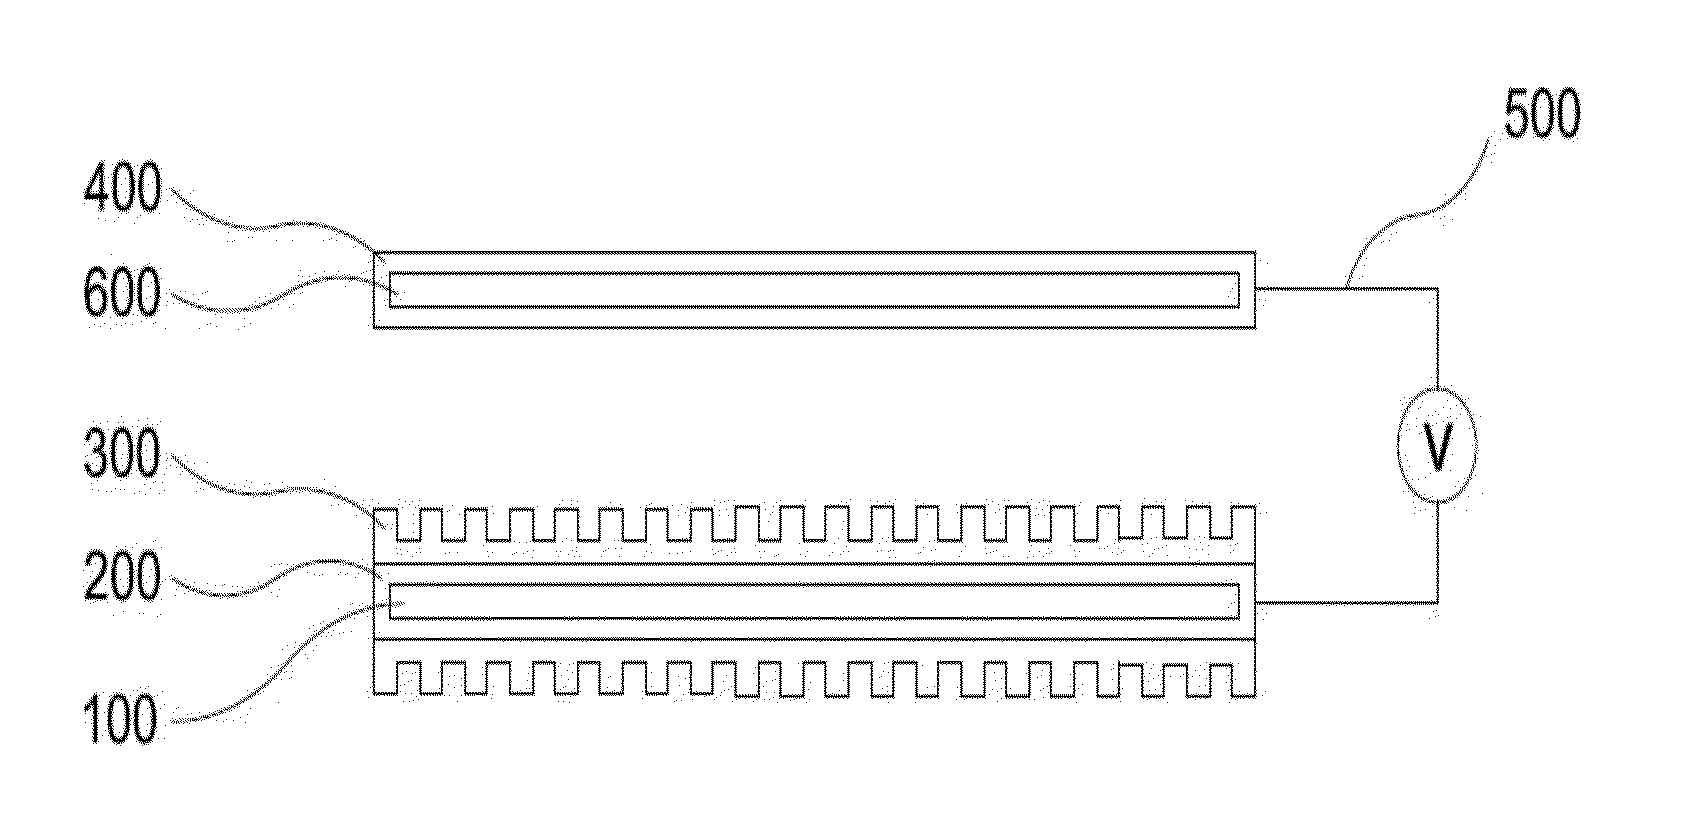 Fibrous triboelectric generator and electronic stimulator using the fibrous triboelectric generator and clothes using the electronic stimulator